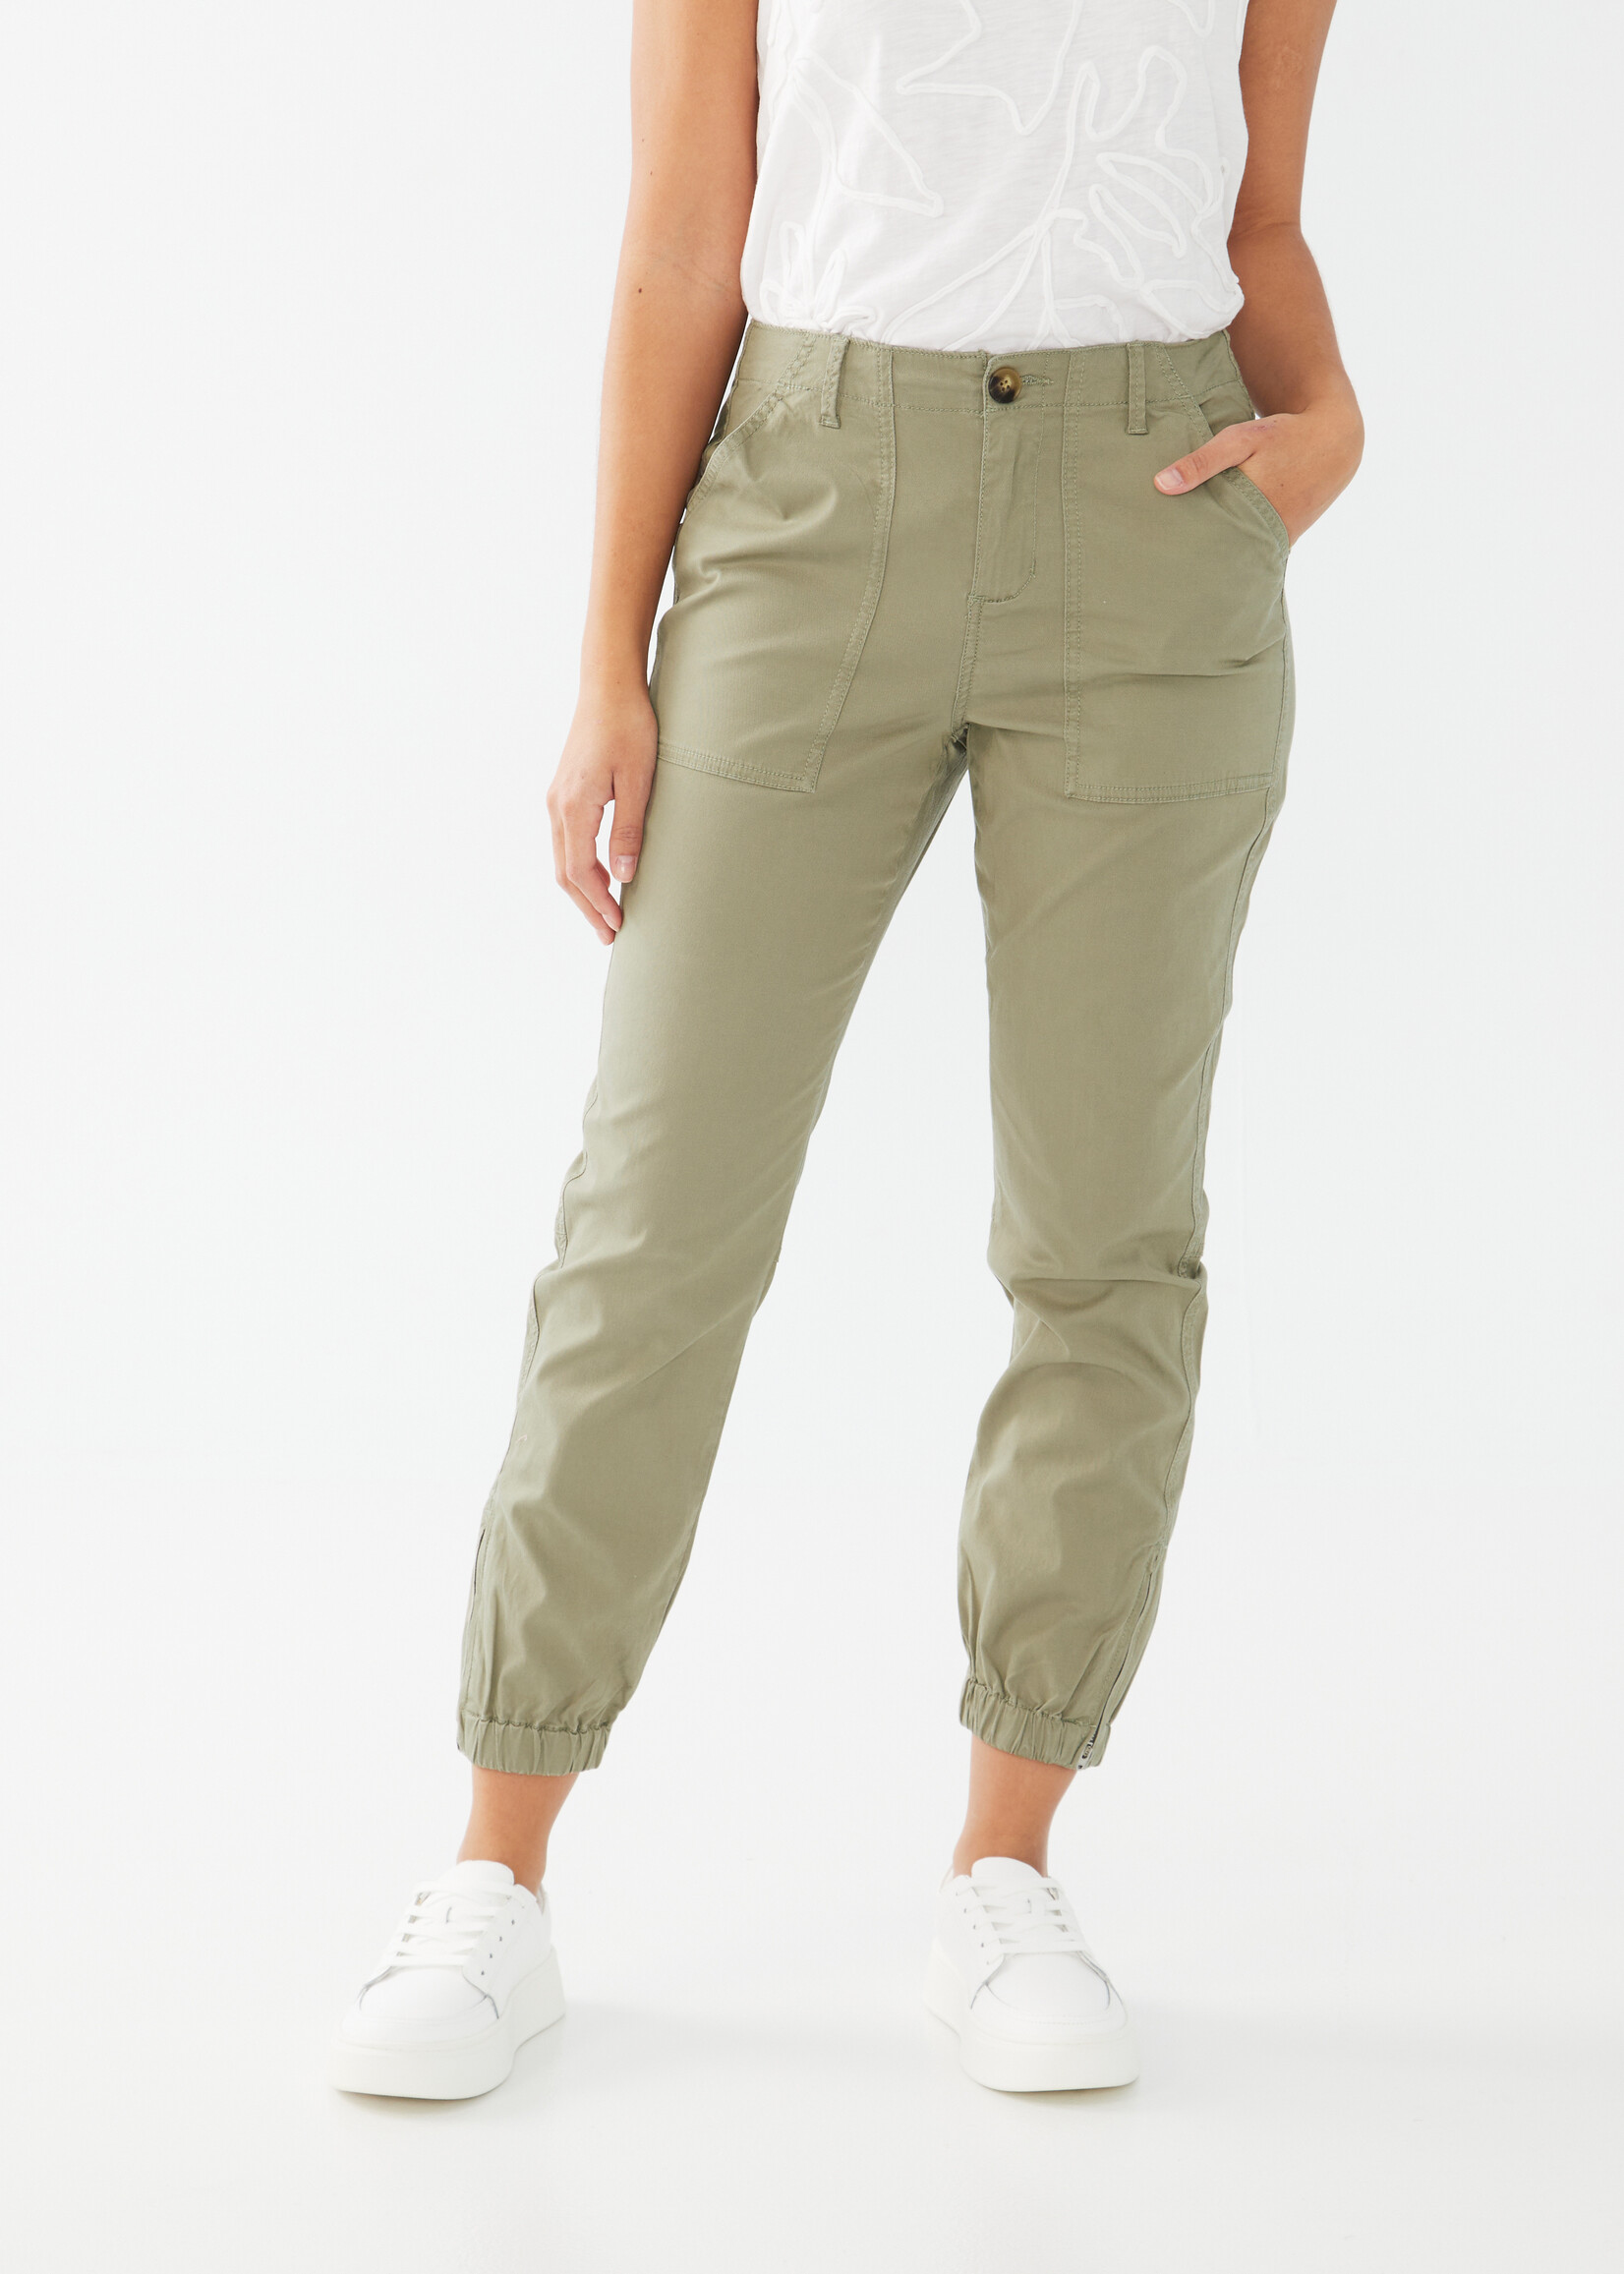 French Dressing Jeans FDJ Cuff Hem Front Pocket Detail Pant